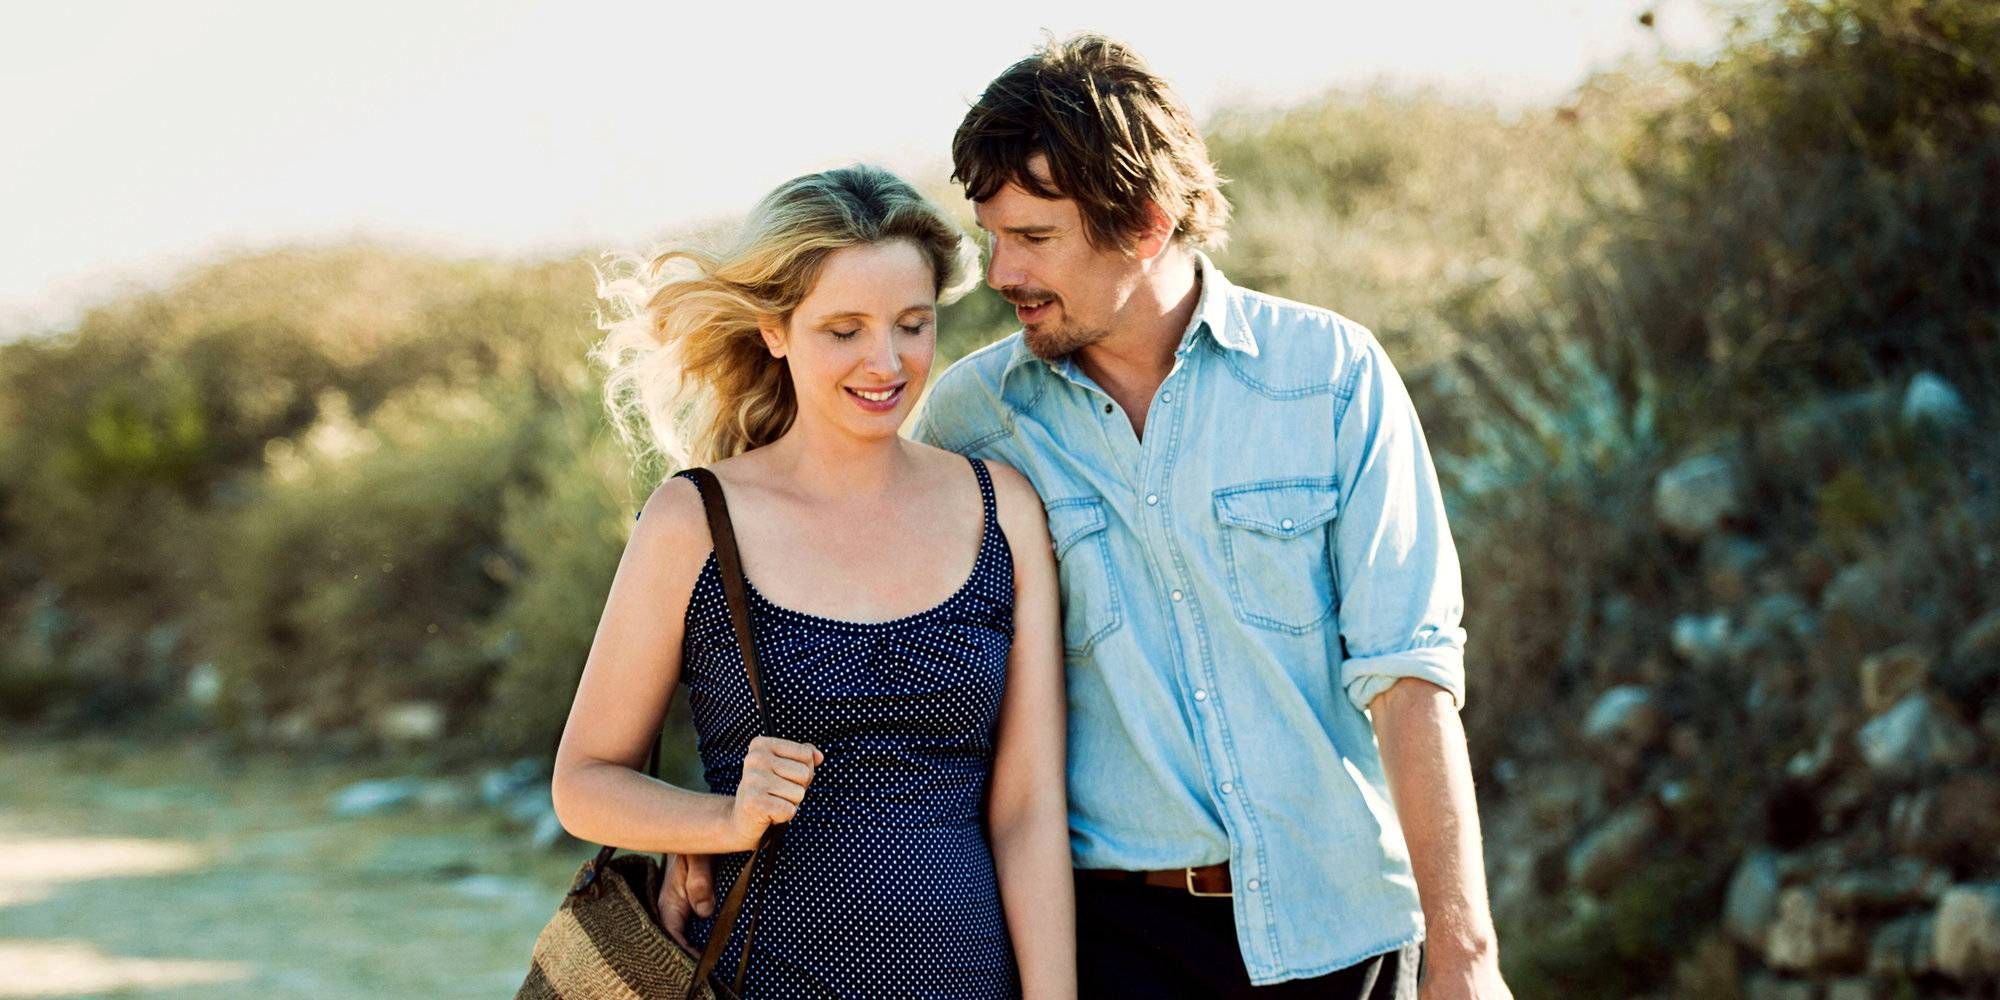 Ethan Hawke and Julie Delpy as Jesse and Celine walking side by side in Before Midnight.